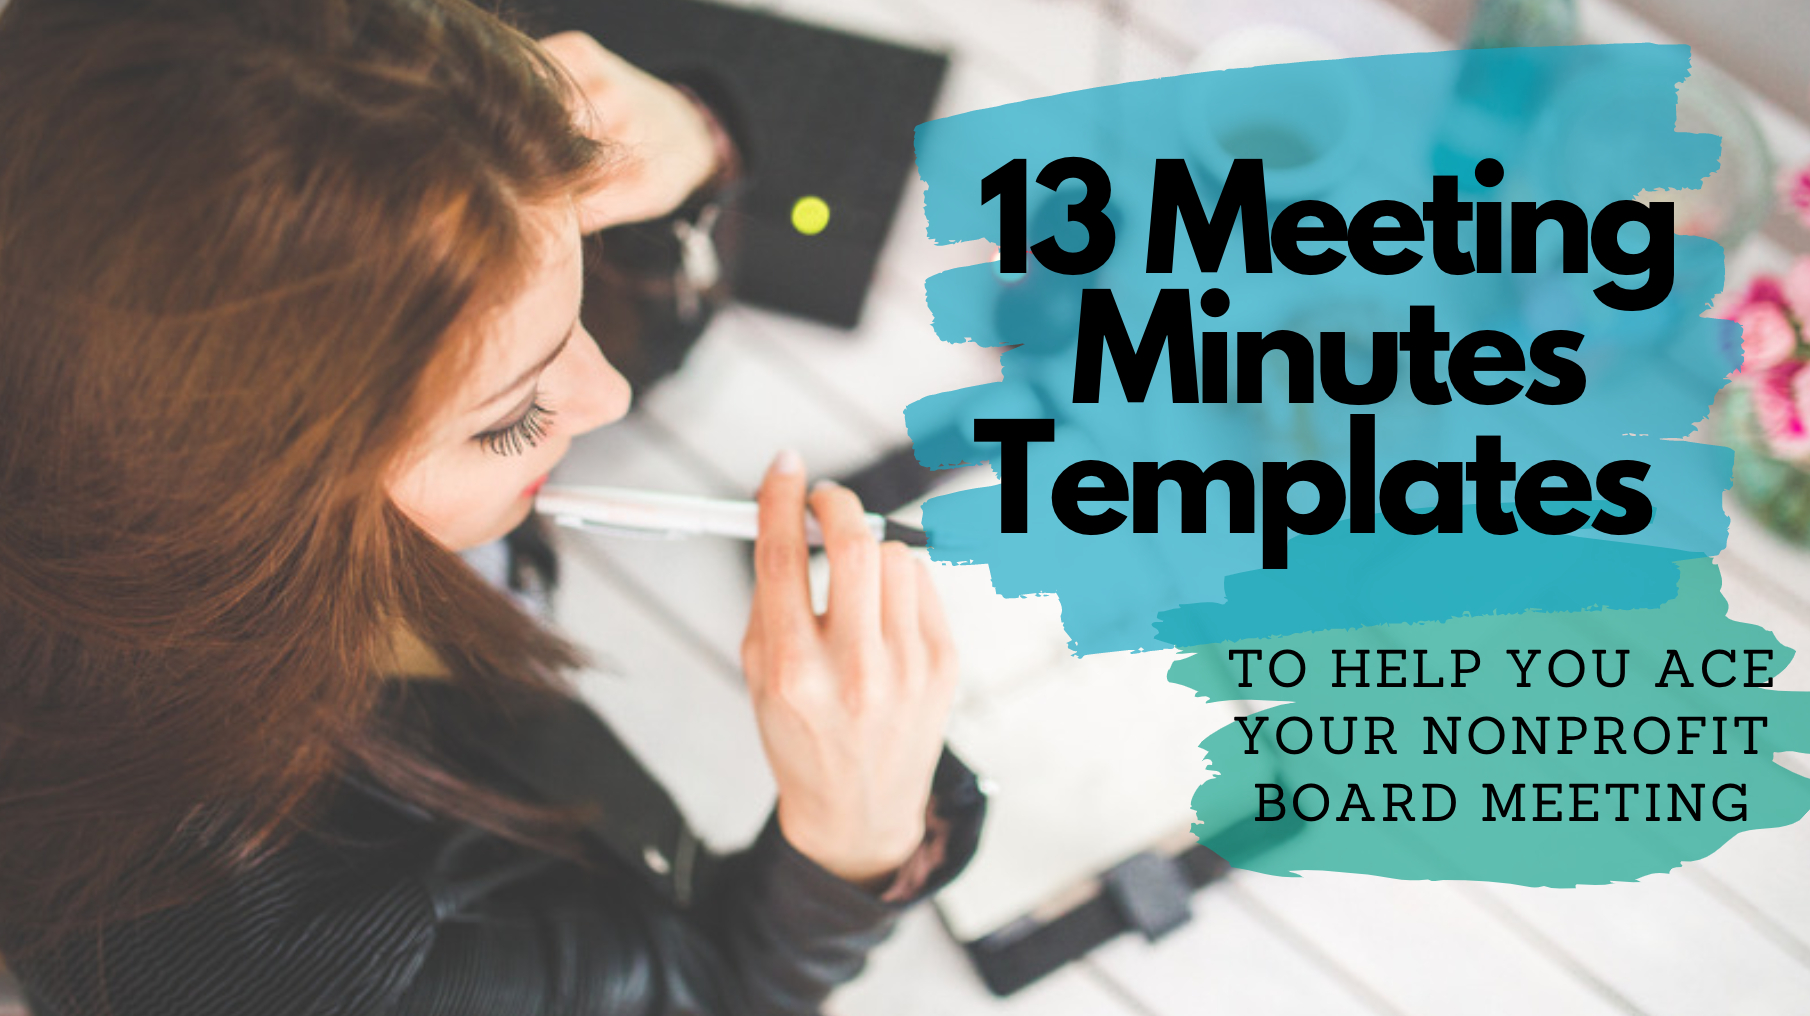 13 Meeting Minutes Templates To Help You Ace Your Nonprofit within dimensions 1810 X 1016